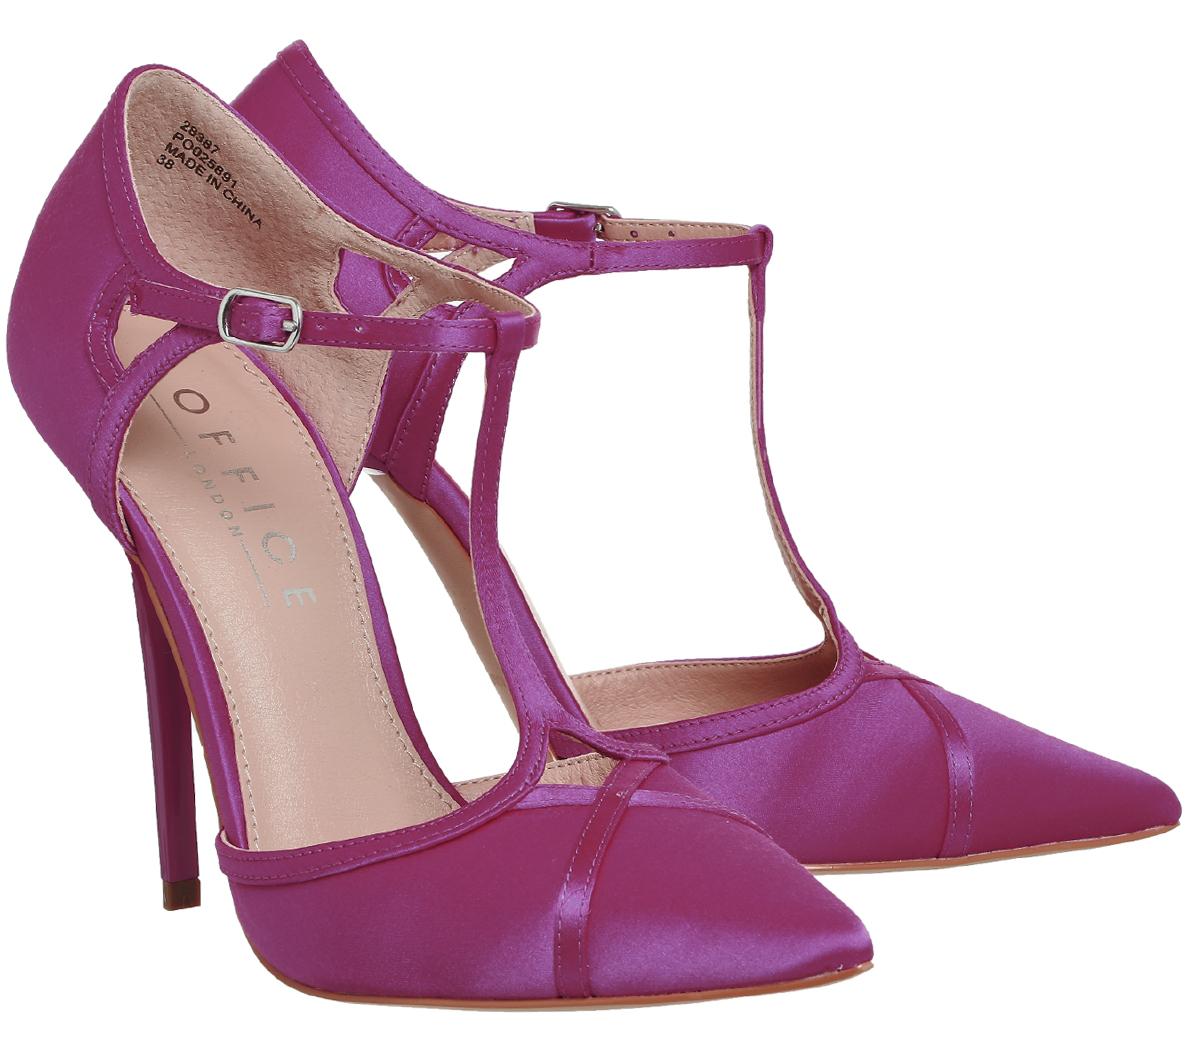 OFFICE Hierarchy T Bar Point Courts Pink Satin - High Heels